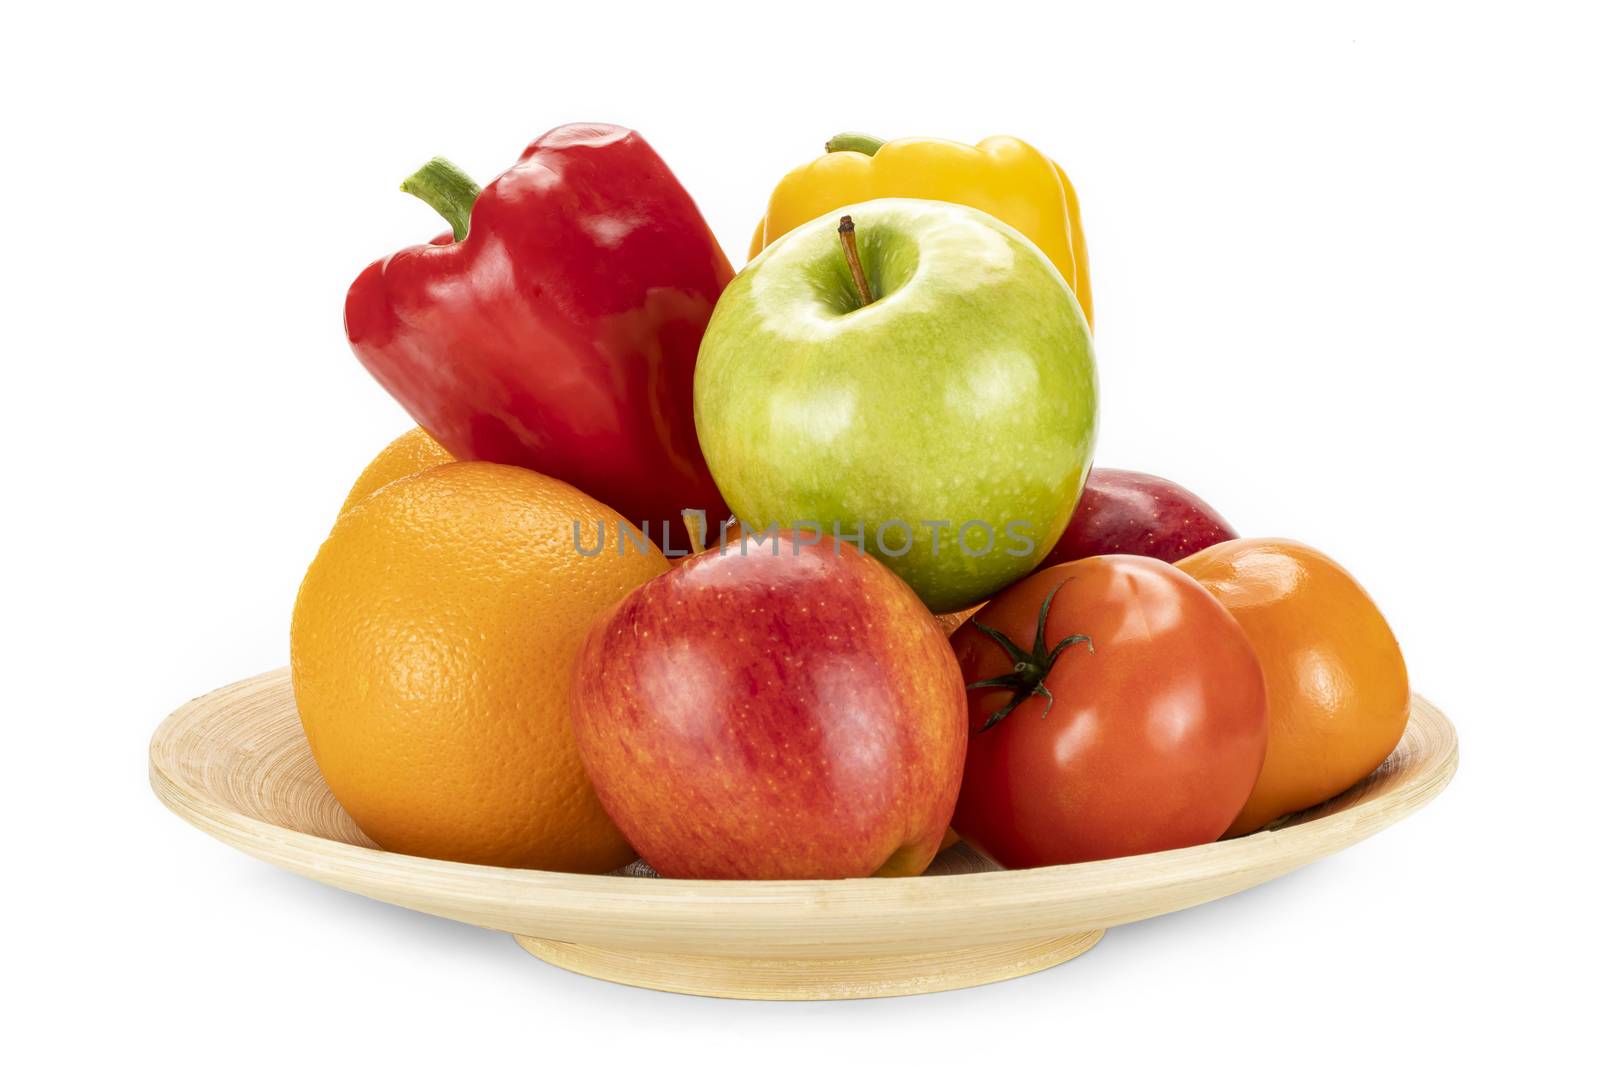 Plate of fresh ripe oranges, red, and green apples, persimmon, red and yellow bell peppers isolated on a white background.